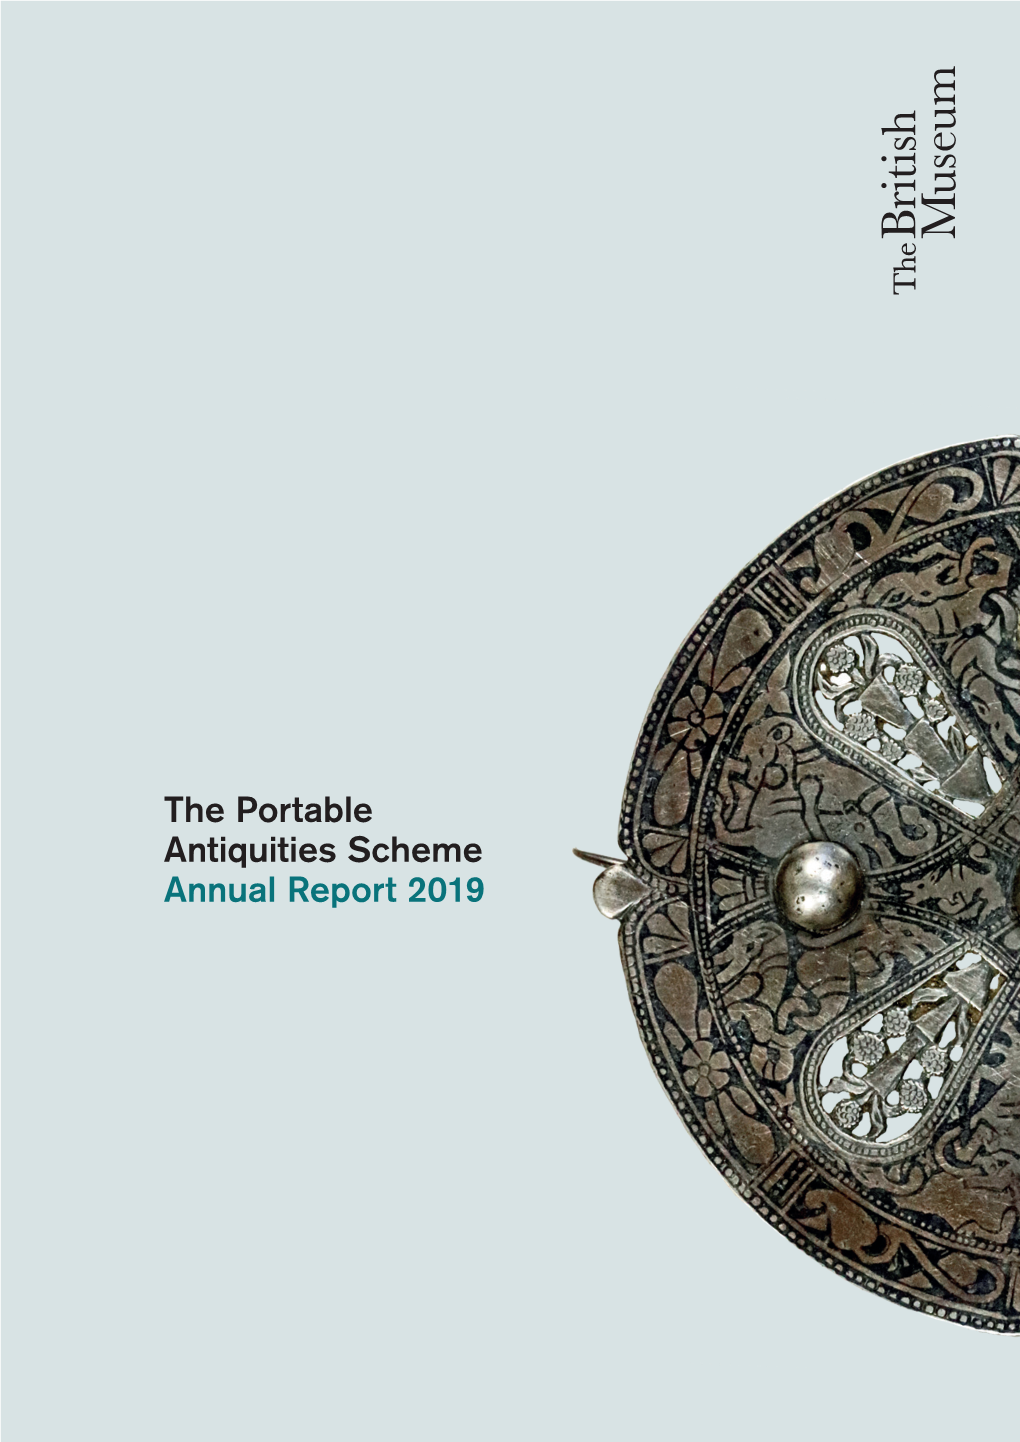 The Portable Antiquities Scheme Annual Report 2019